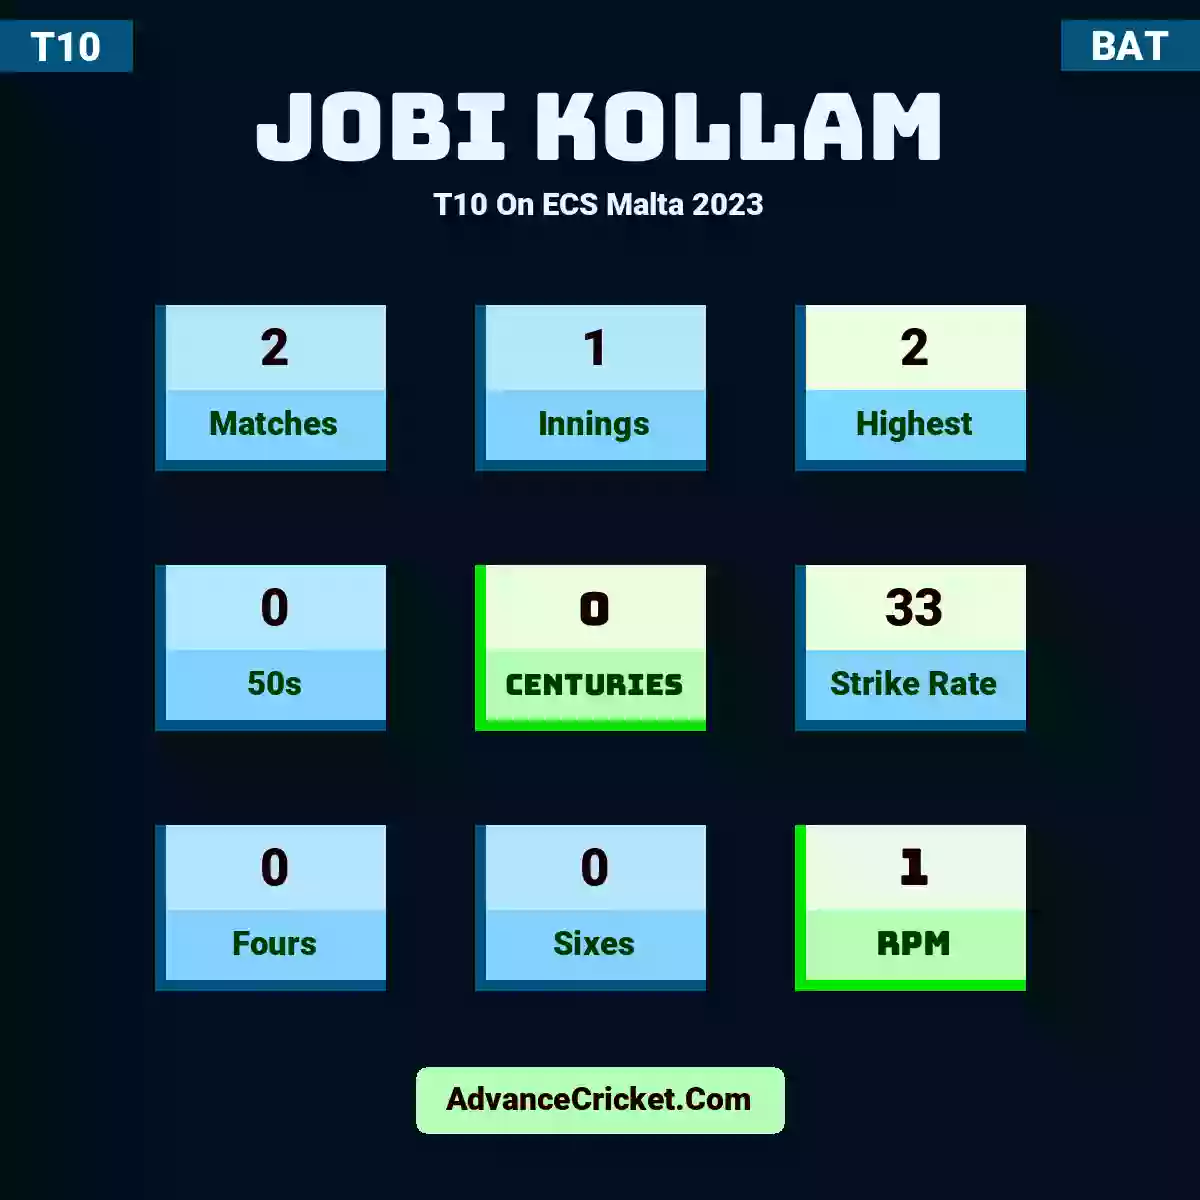 Jobi Kollam T10  On ECS Malta 2023, Jobi Kollam played 2 matches, scored 2 runs as highest, 0 half-centuries, and 0 centuries, with a strike rate of 33. J.Kollam hit 0 fours and 0 sixes, with an RPM of 1.